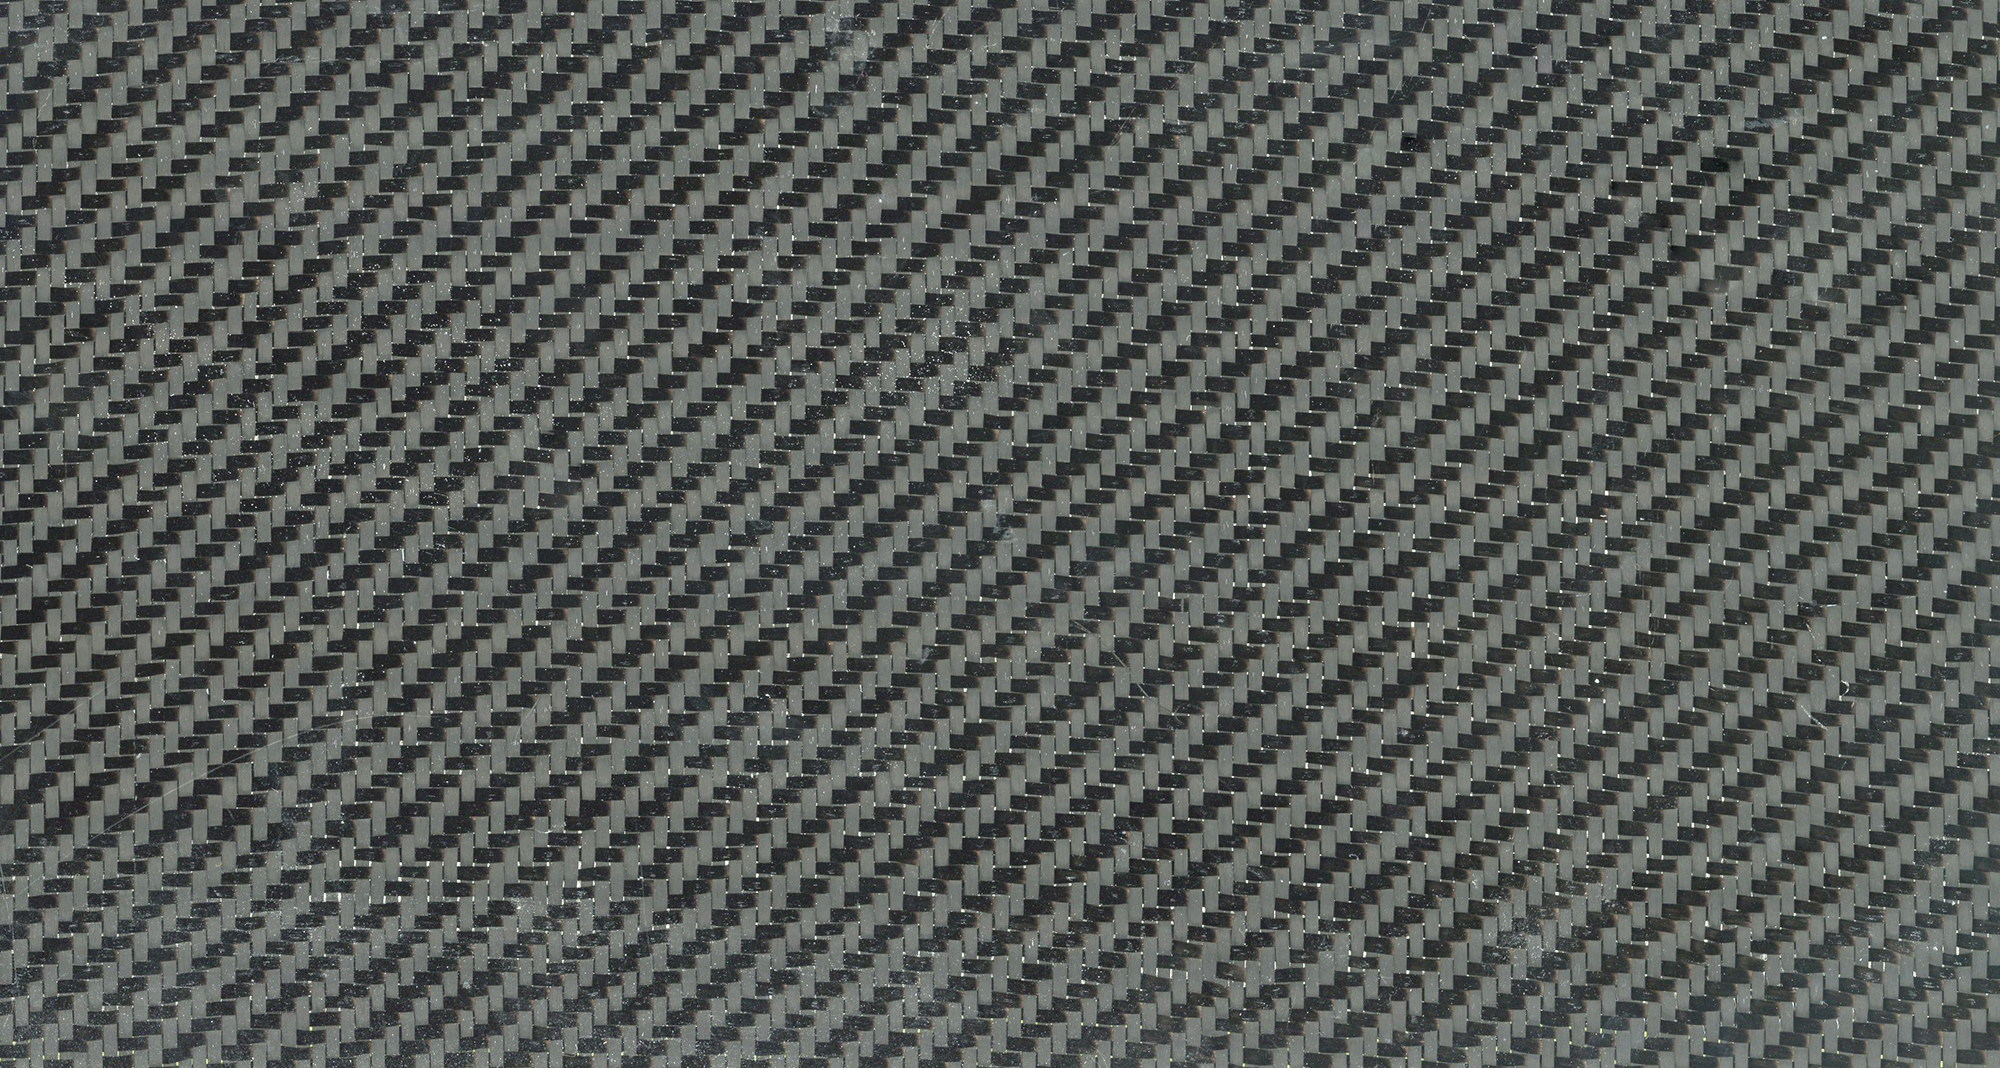 Graphene Makes Carbon Fiber Stronger, Stiffer And Possibly, 48% OFF